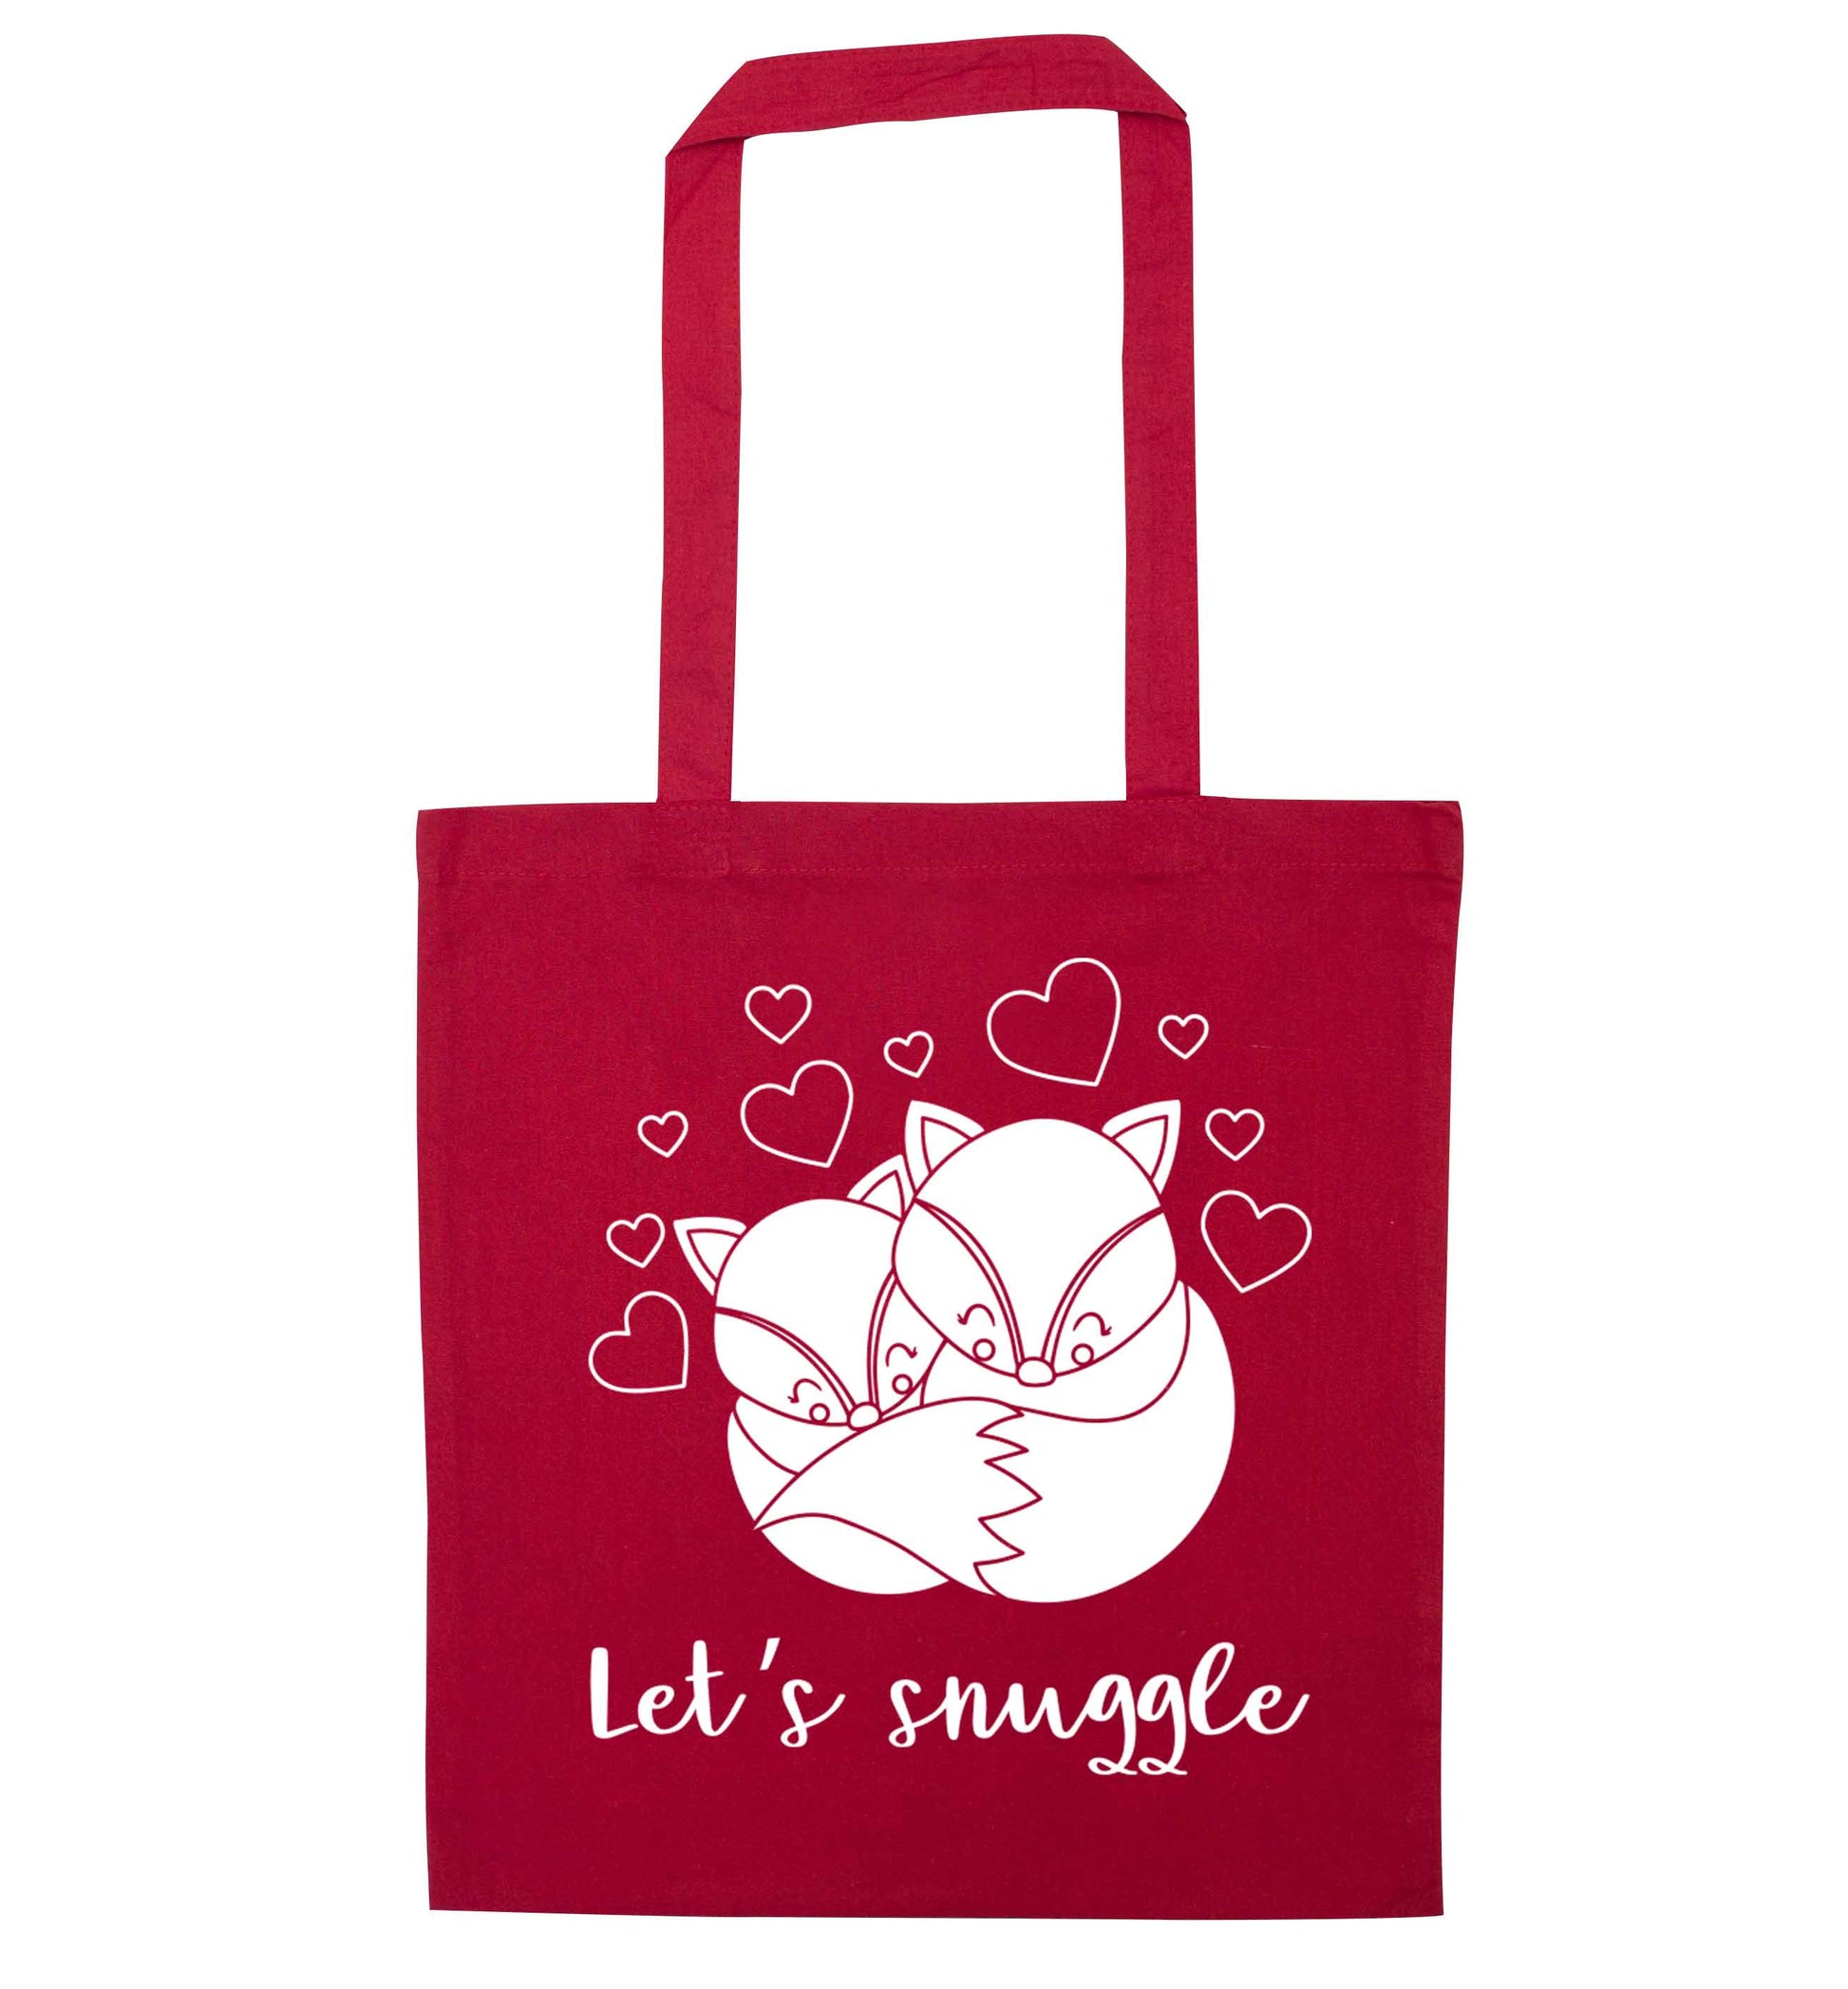 Let's snuggle red tote bag